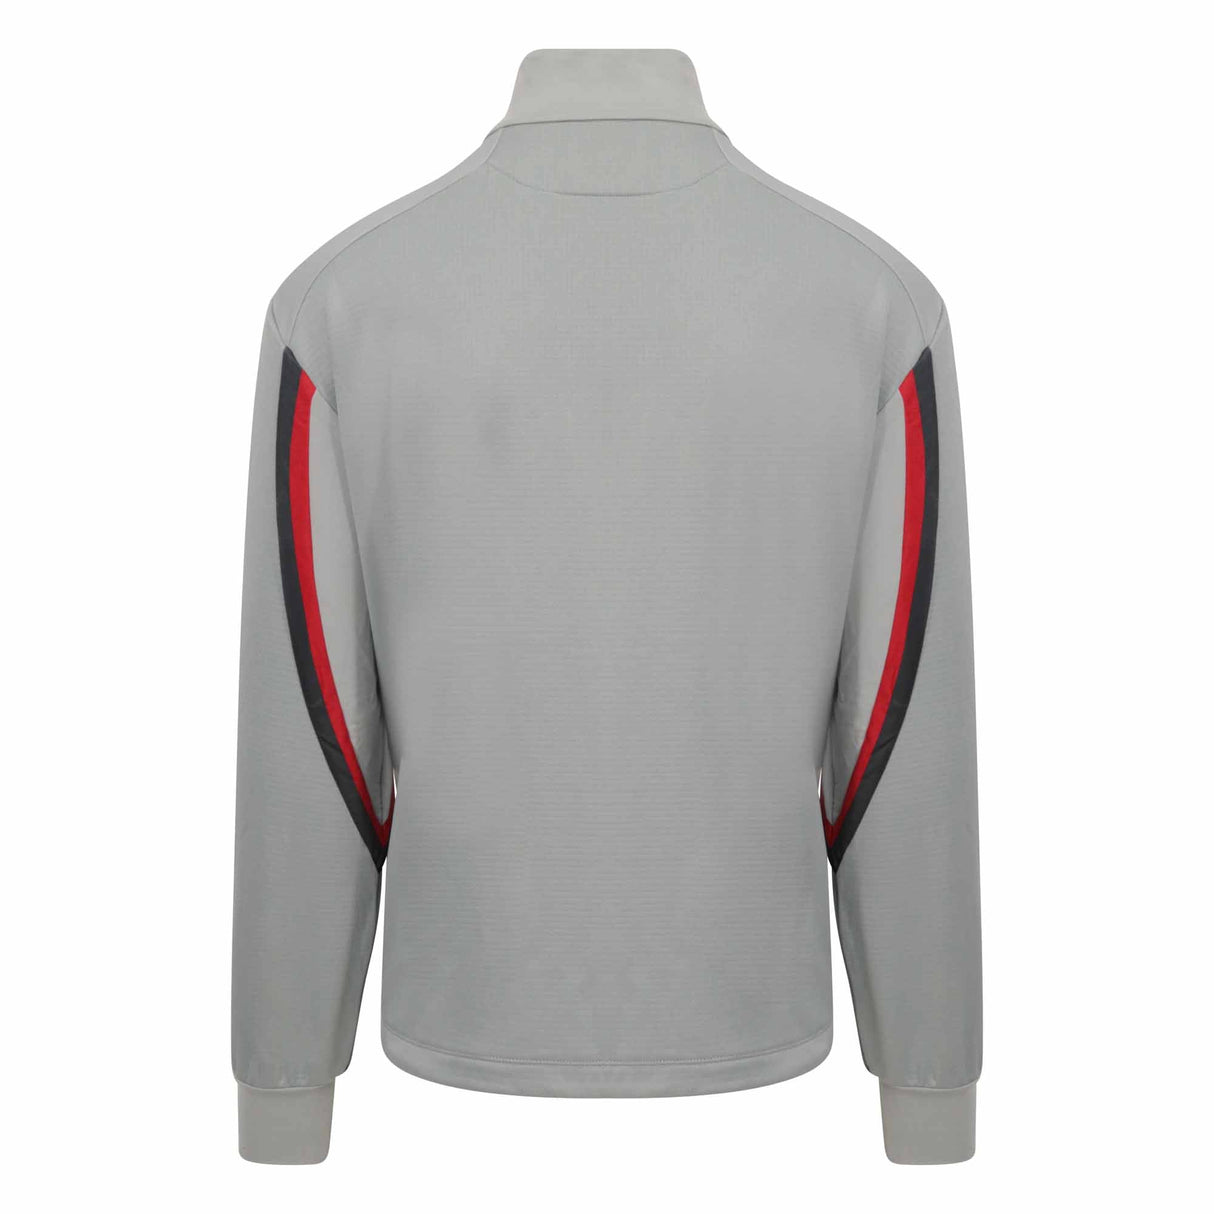 Wales Rugby Qtr Zip Fleece Top - 22/23 |Outerwear | Macron WRU | Absolute Rugby